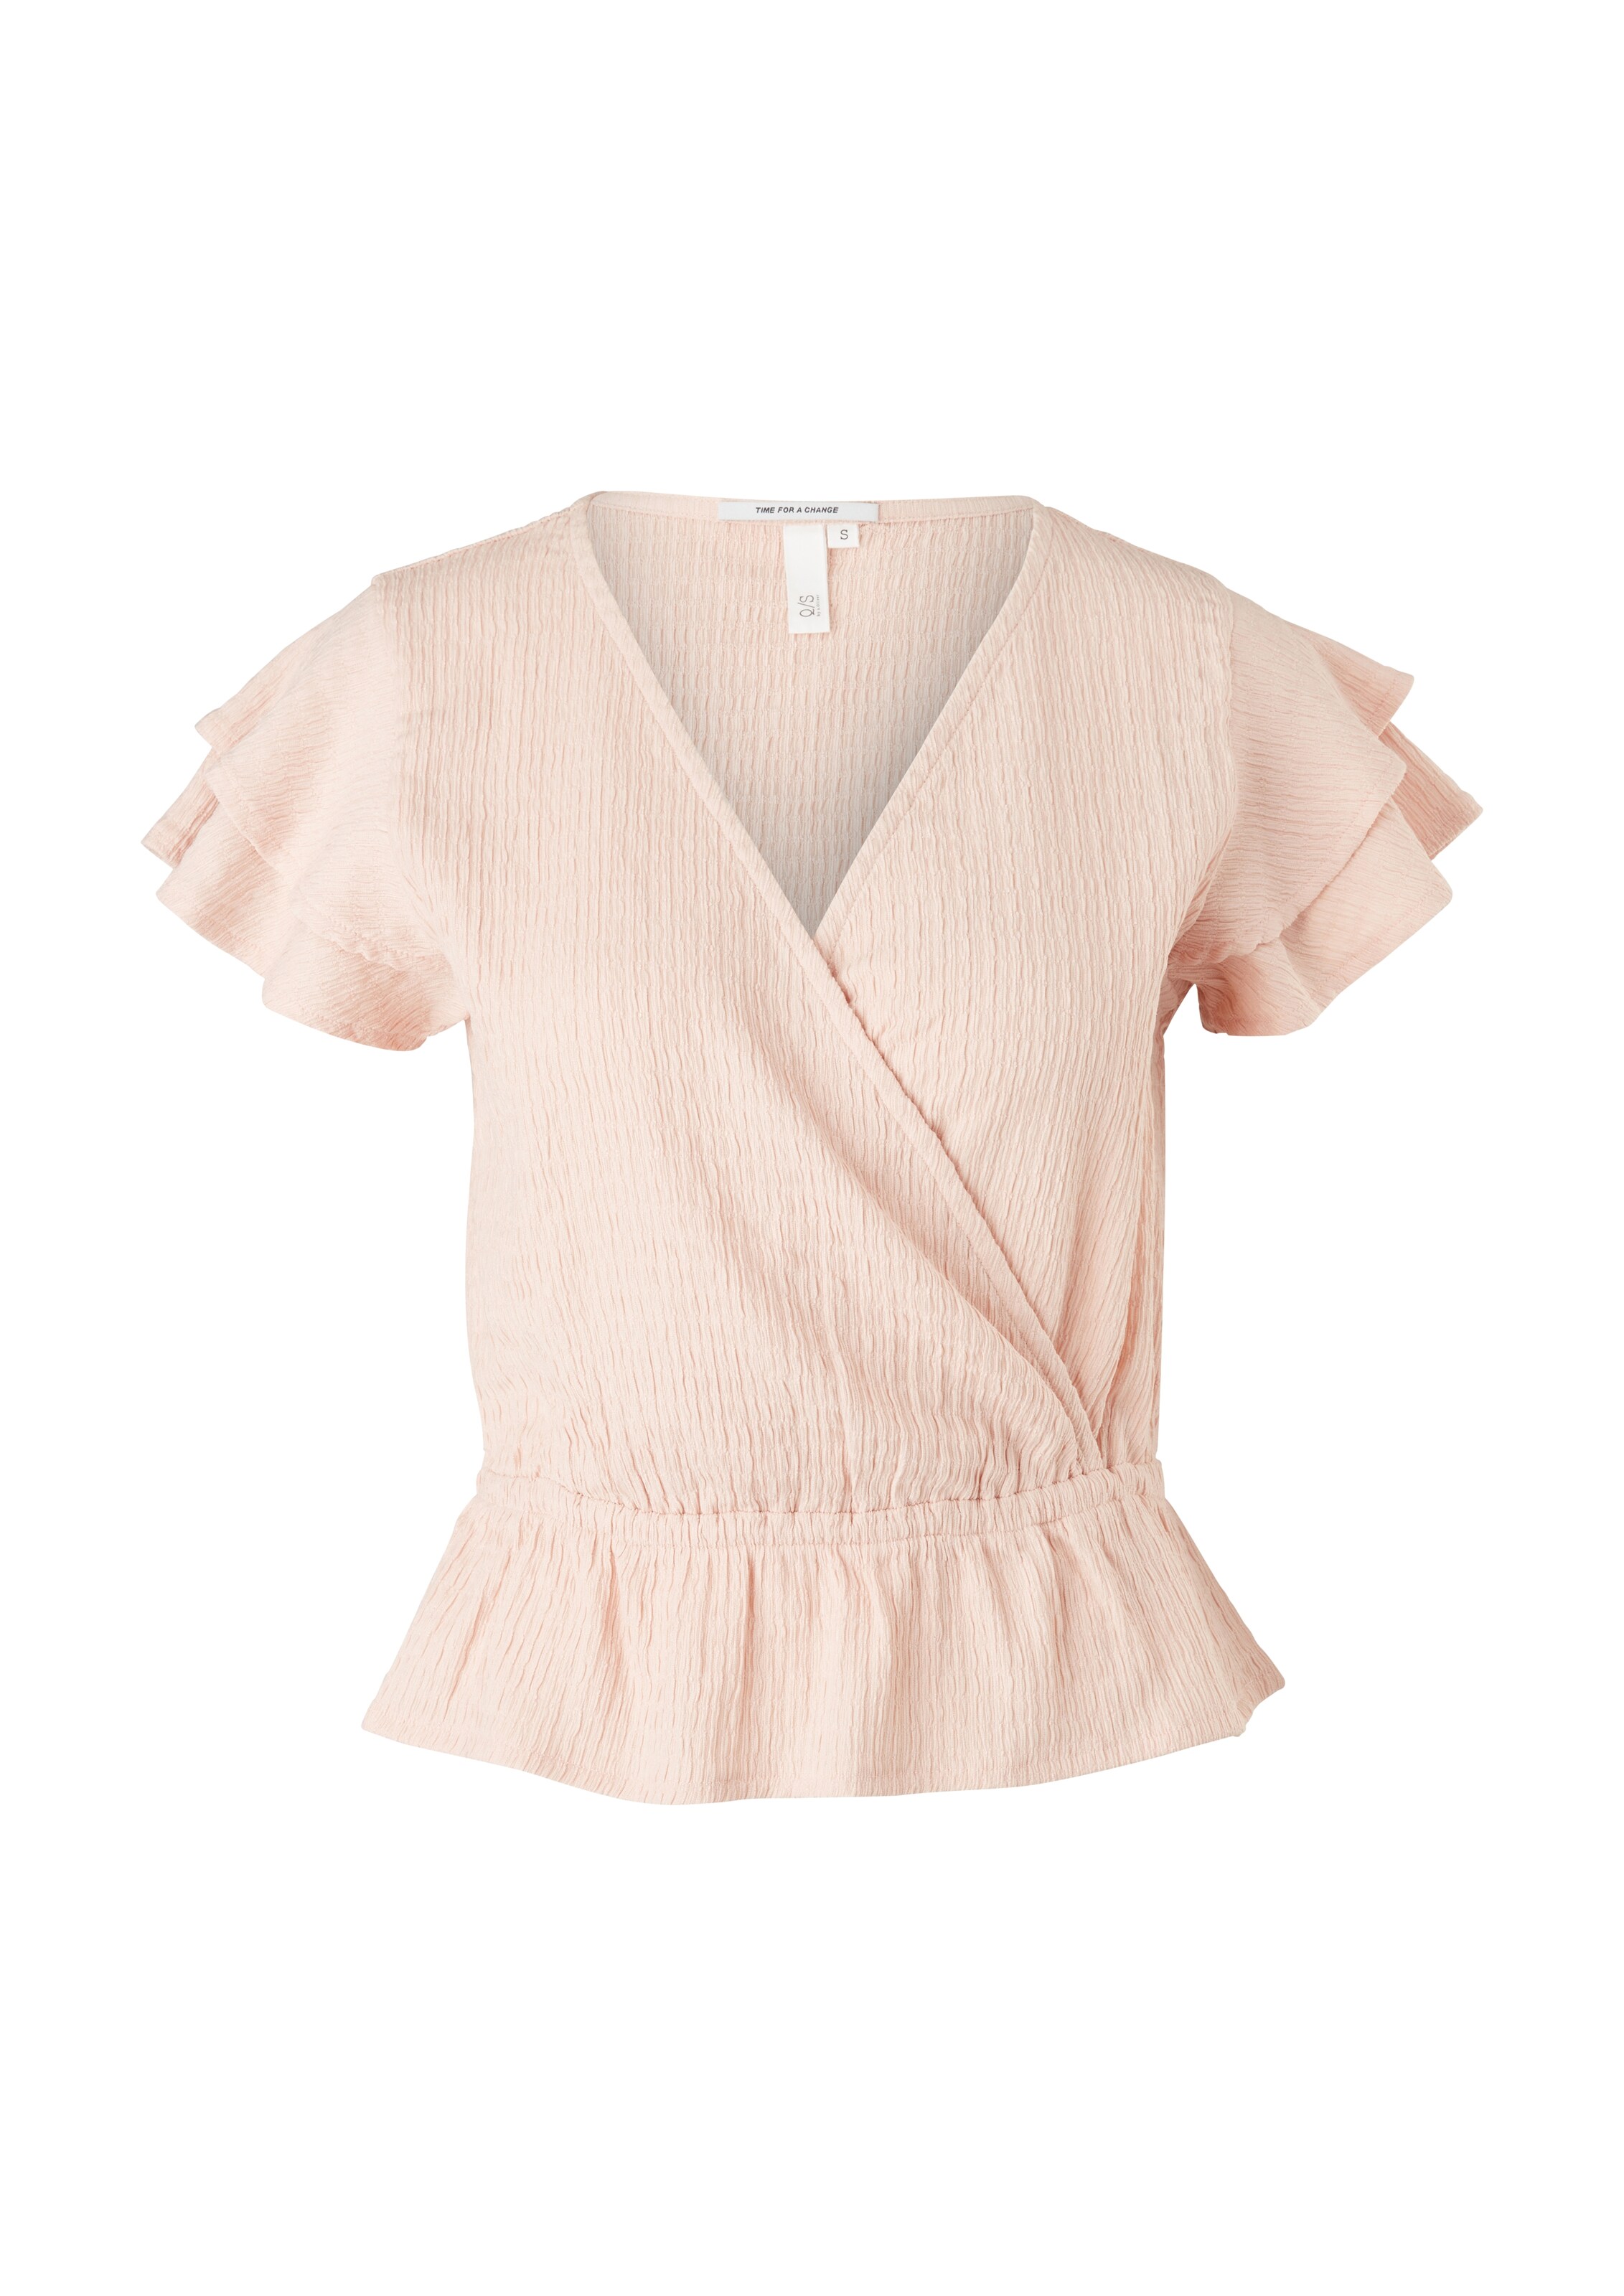 Frauen Shirts & Tops QS by s.Oliver T-Shirt in Apricot - YG63885